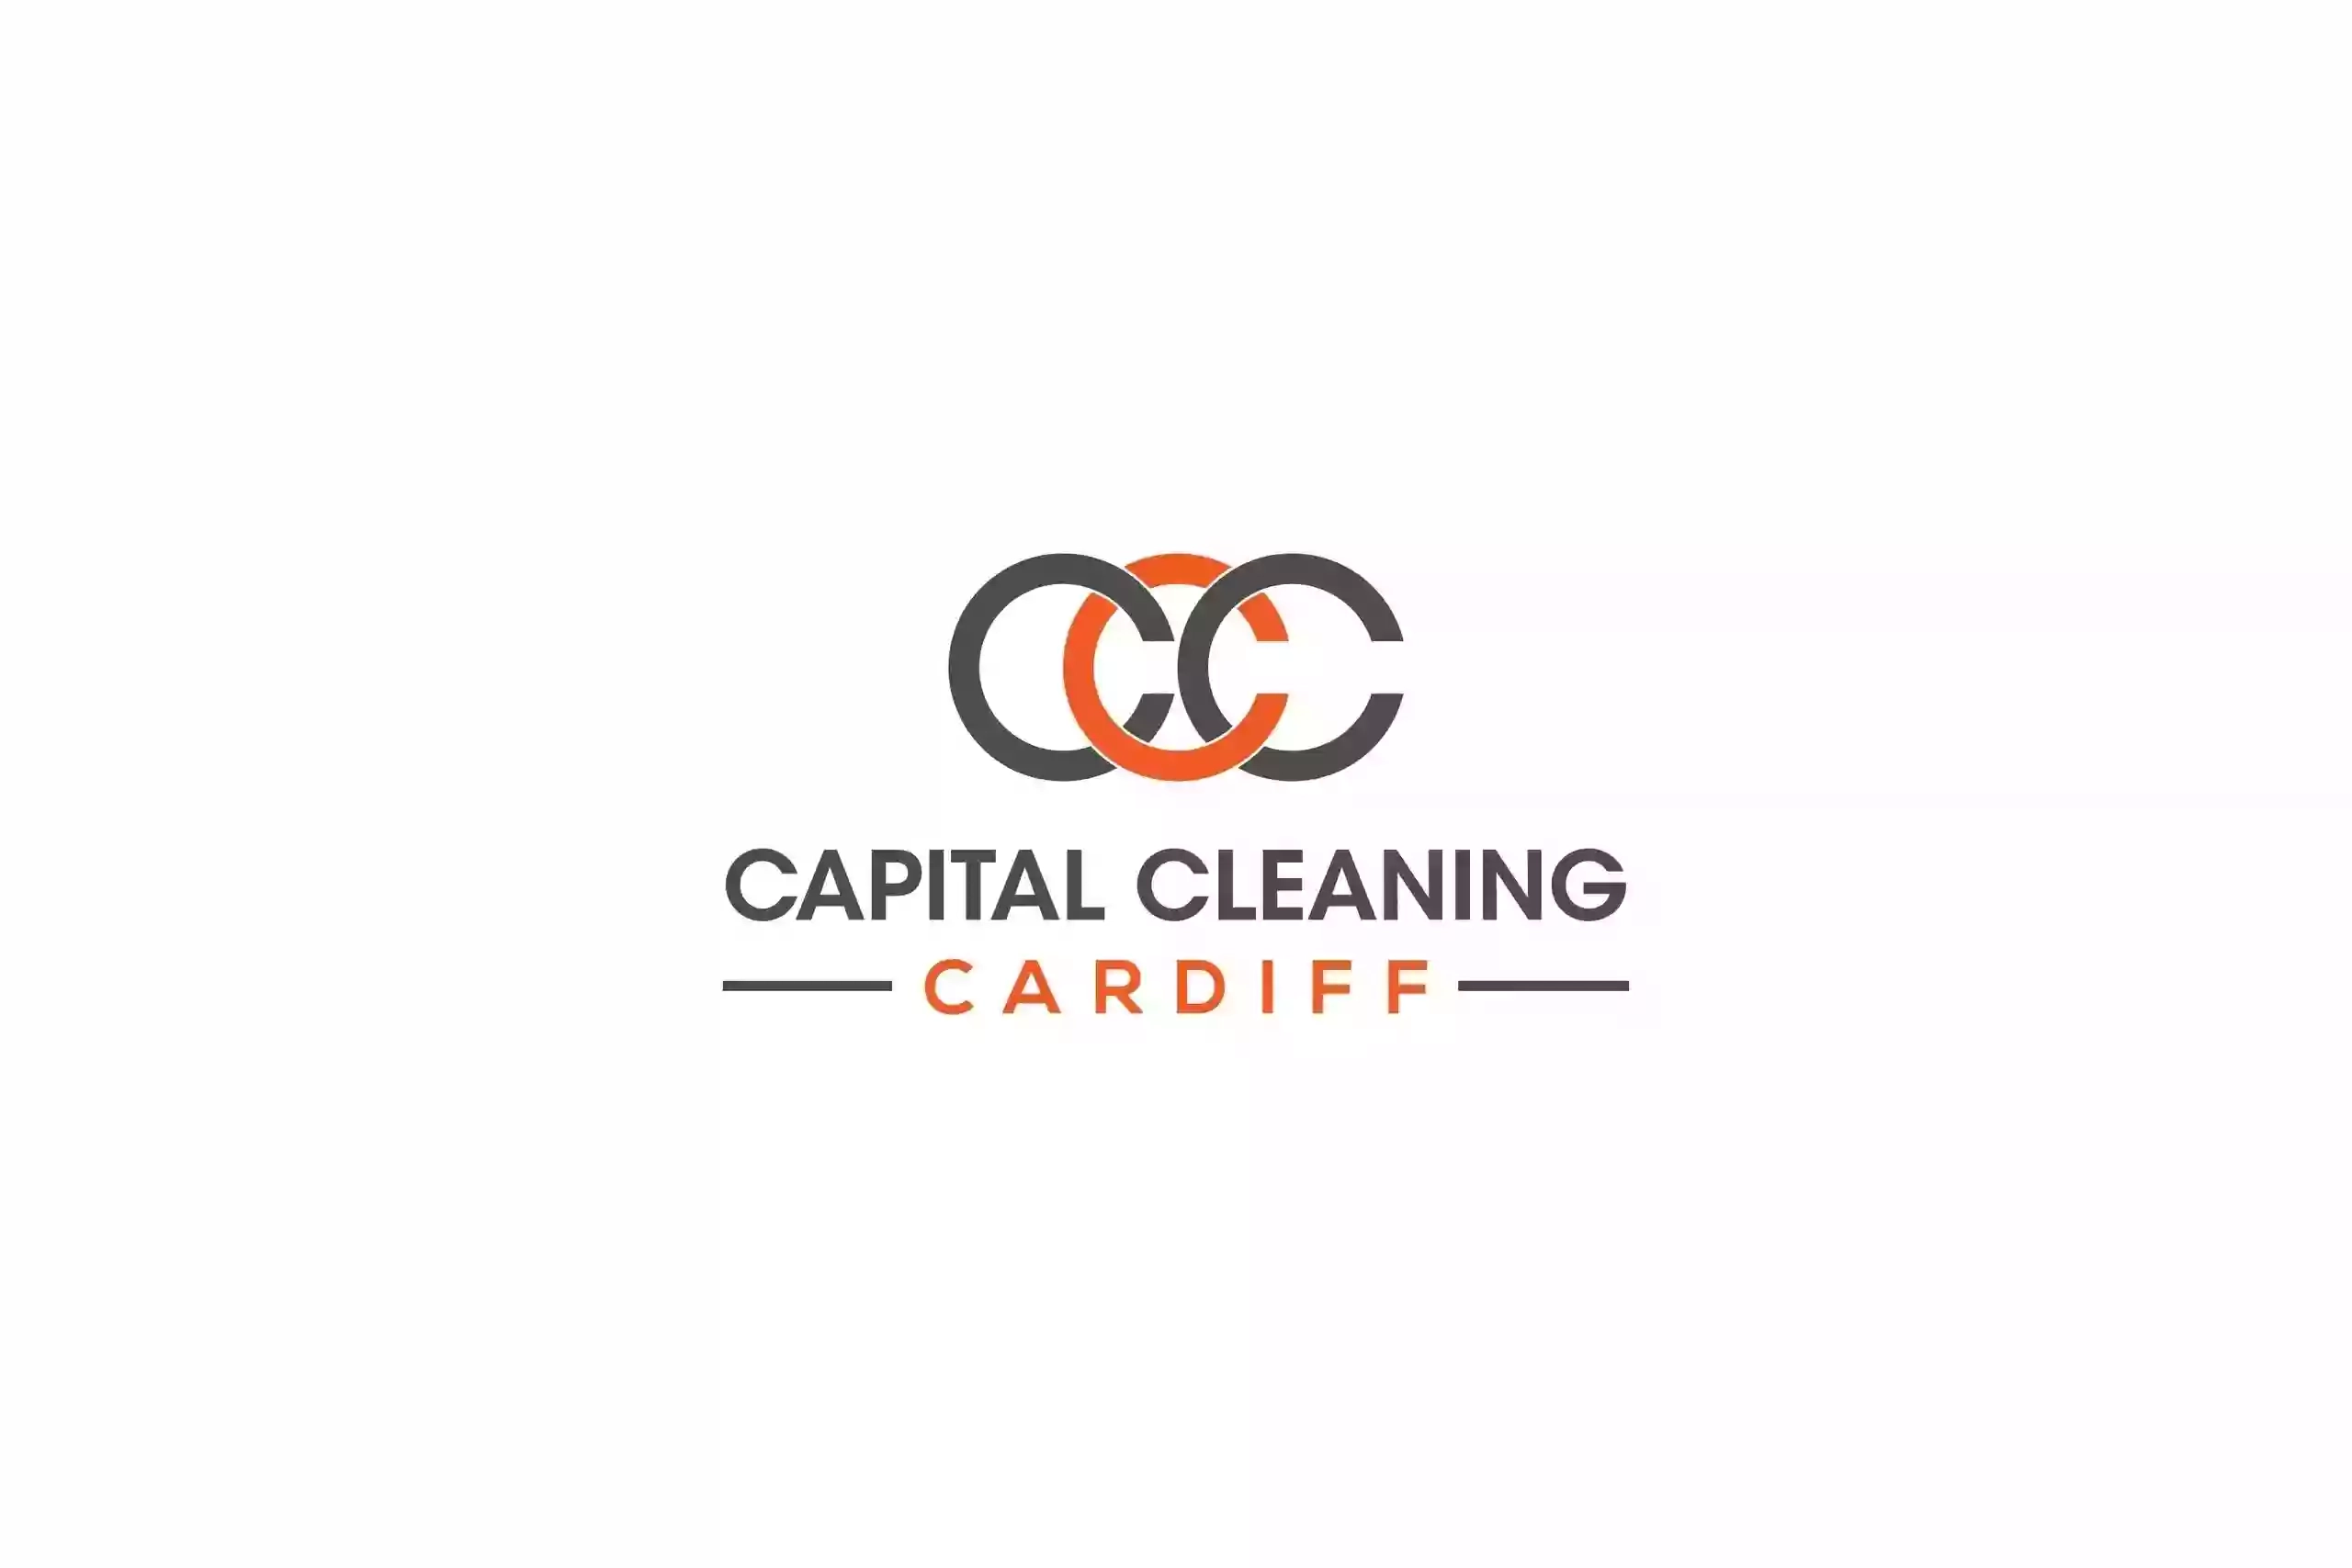 Capital Cleaning Cardiff Limited